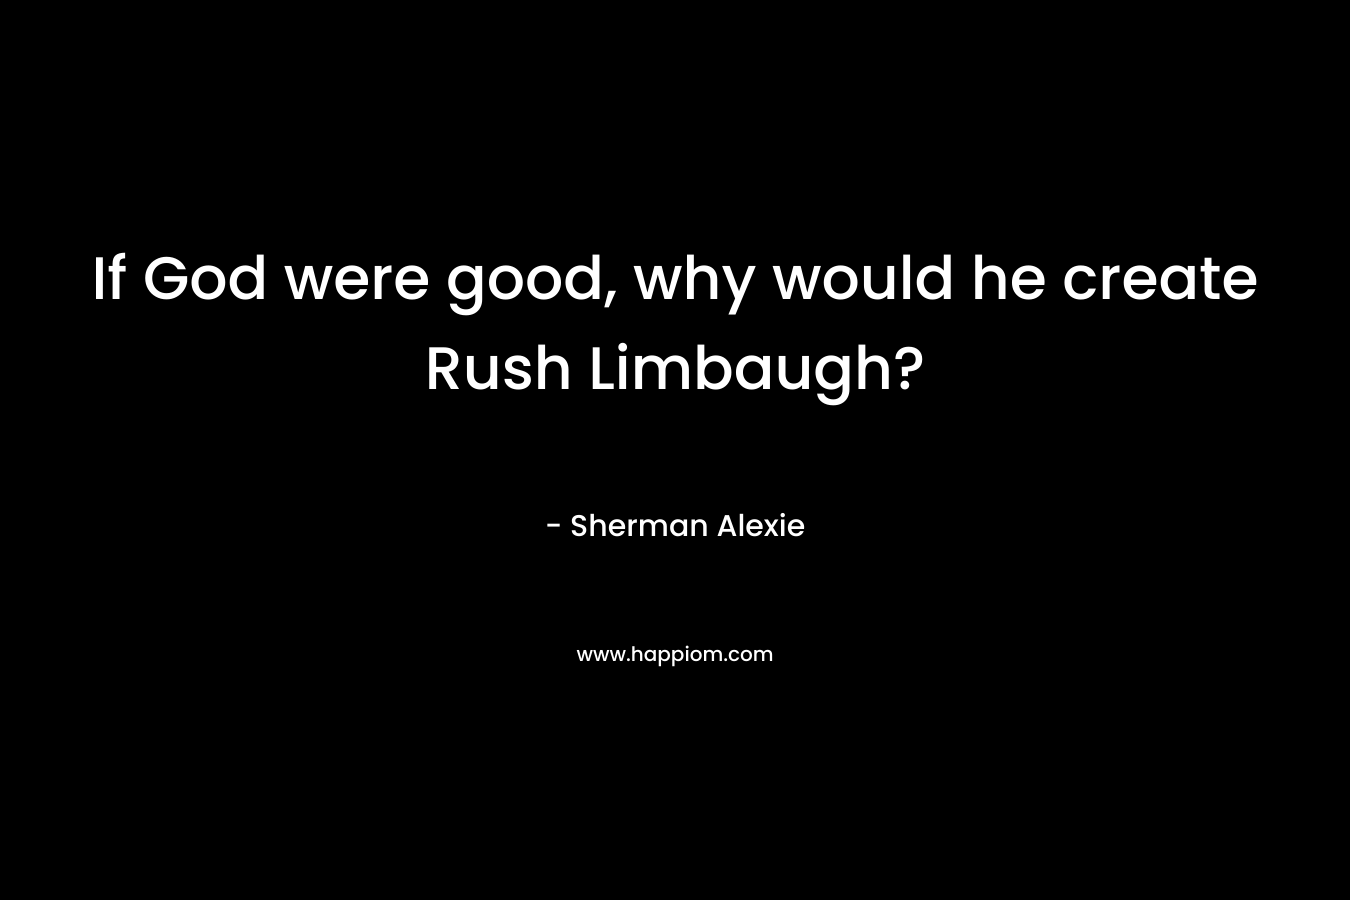 If God were good, why would he create Rush Limbaugh?